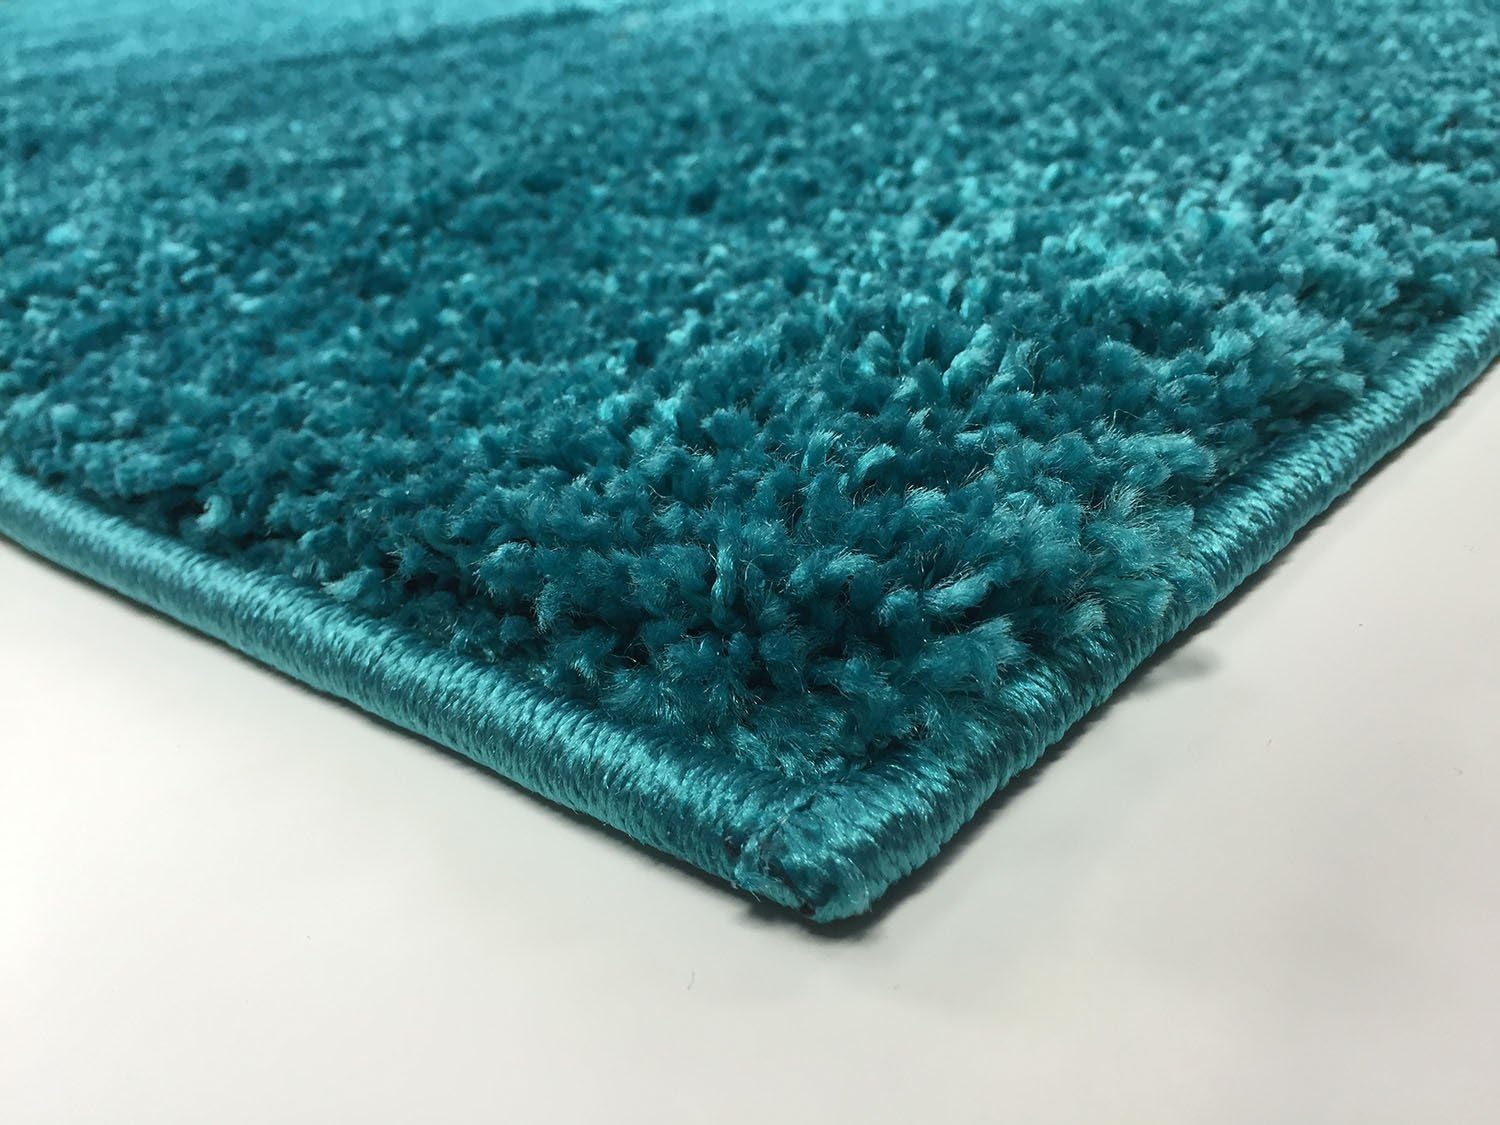 SOHO Shaggy Collection Solid Color Shag Area Rug (Turquoise Blue, 5 x 7)-4